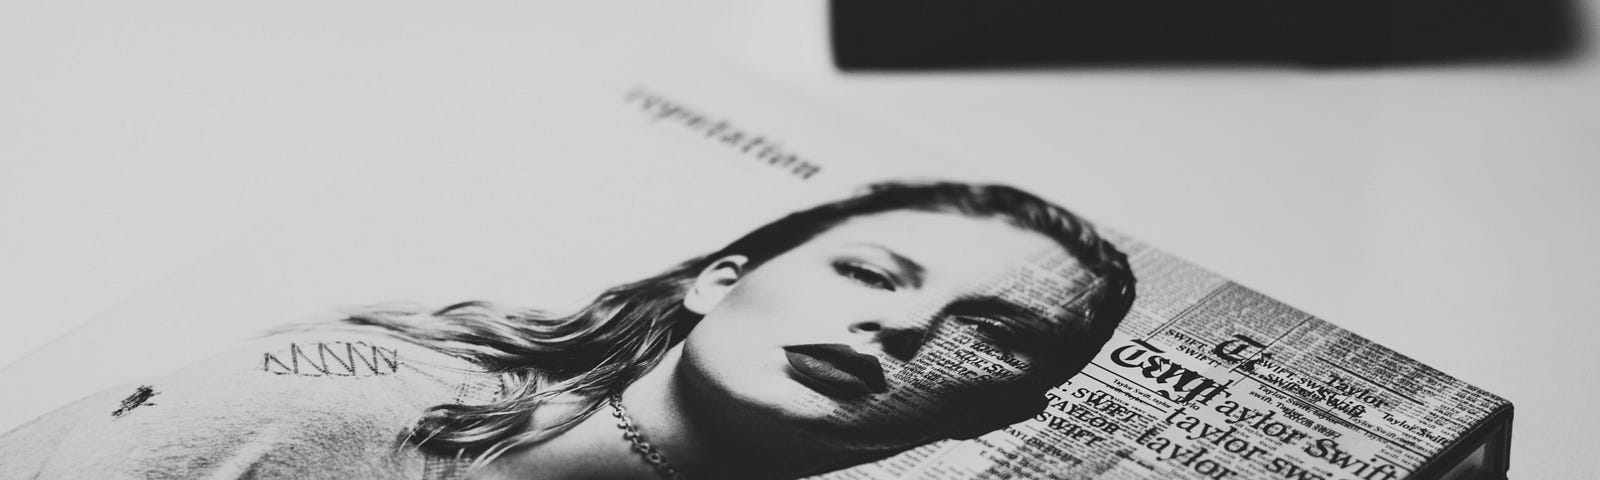 Image of Taylor Swift’s Reputation album on a white table.